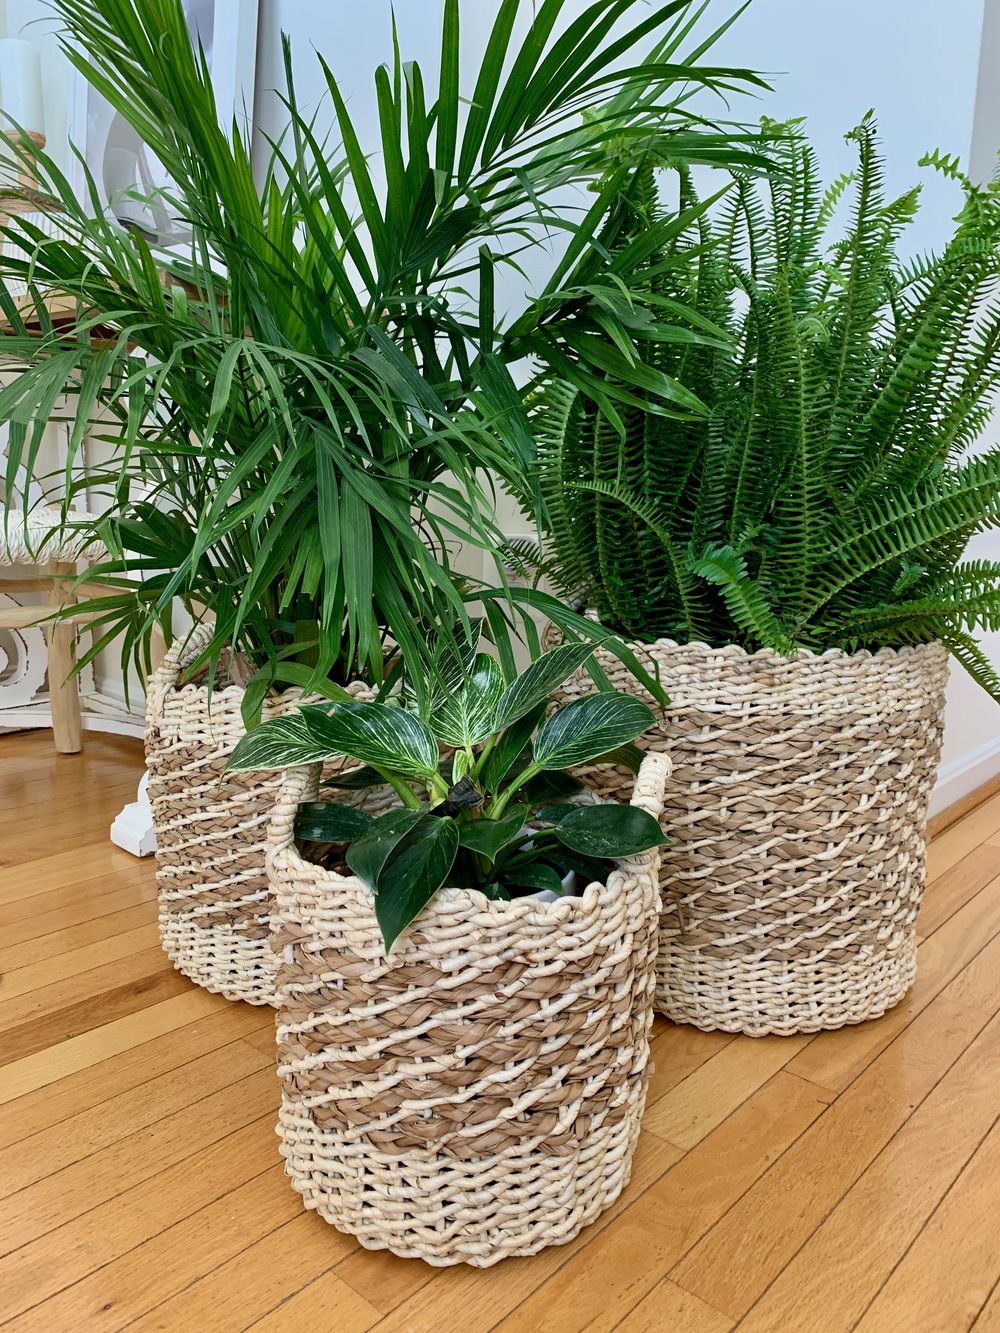 Small Planters for Indoor House Plants